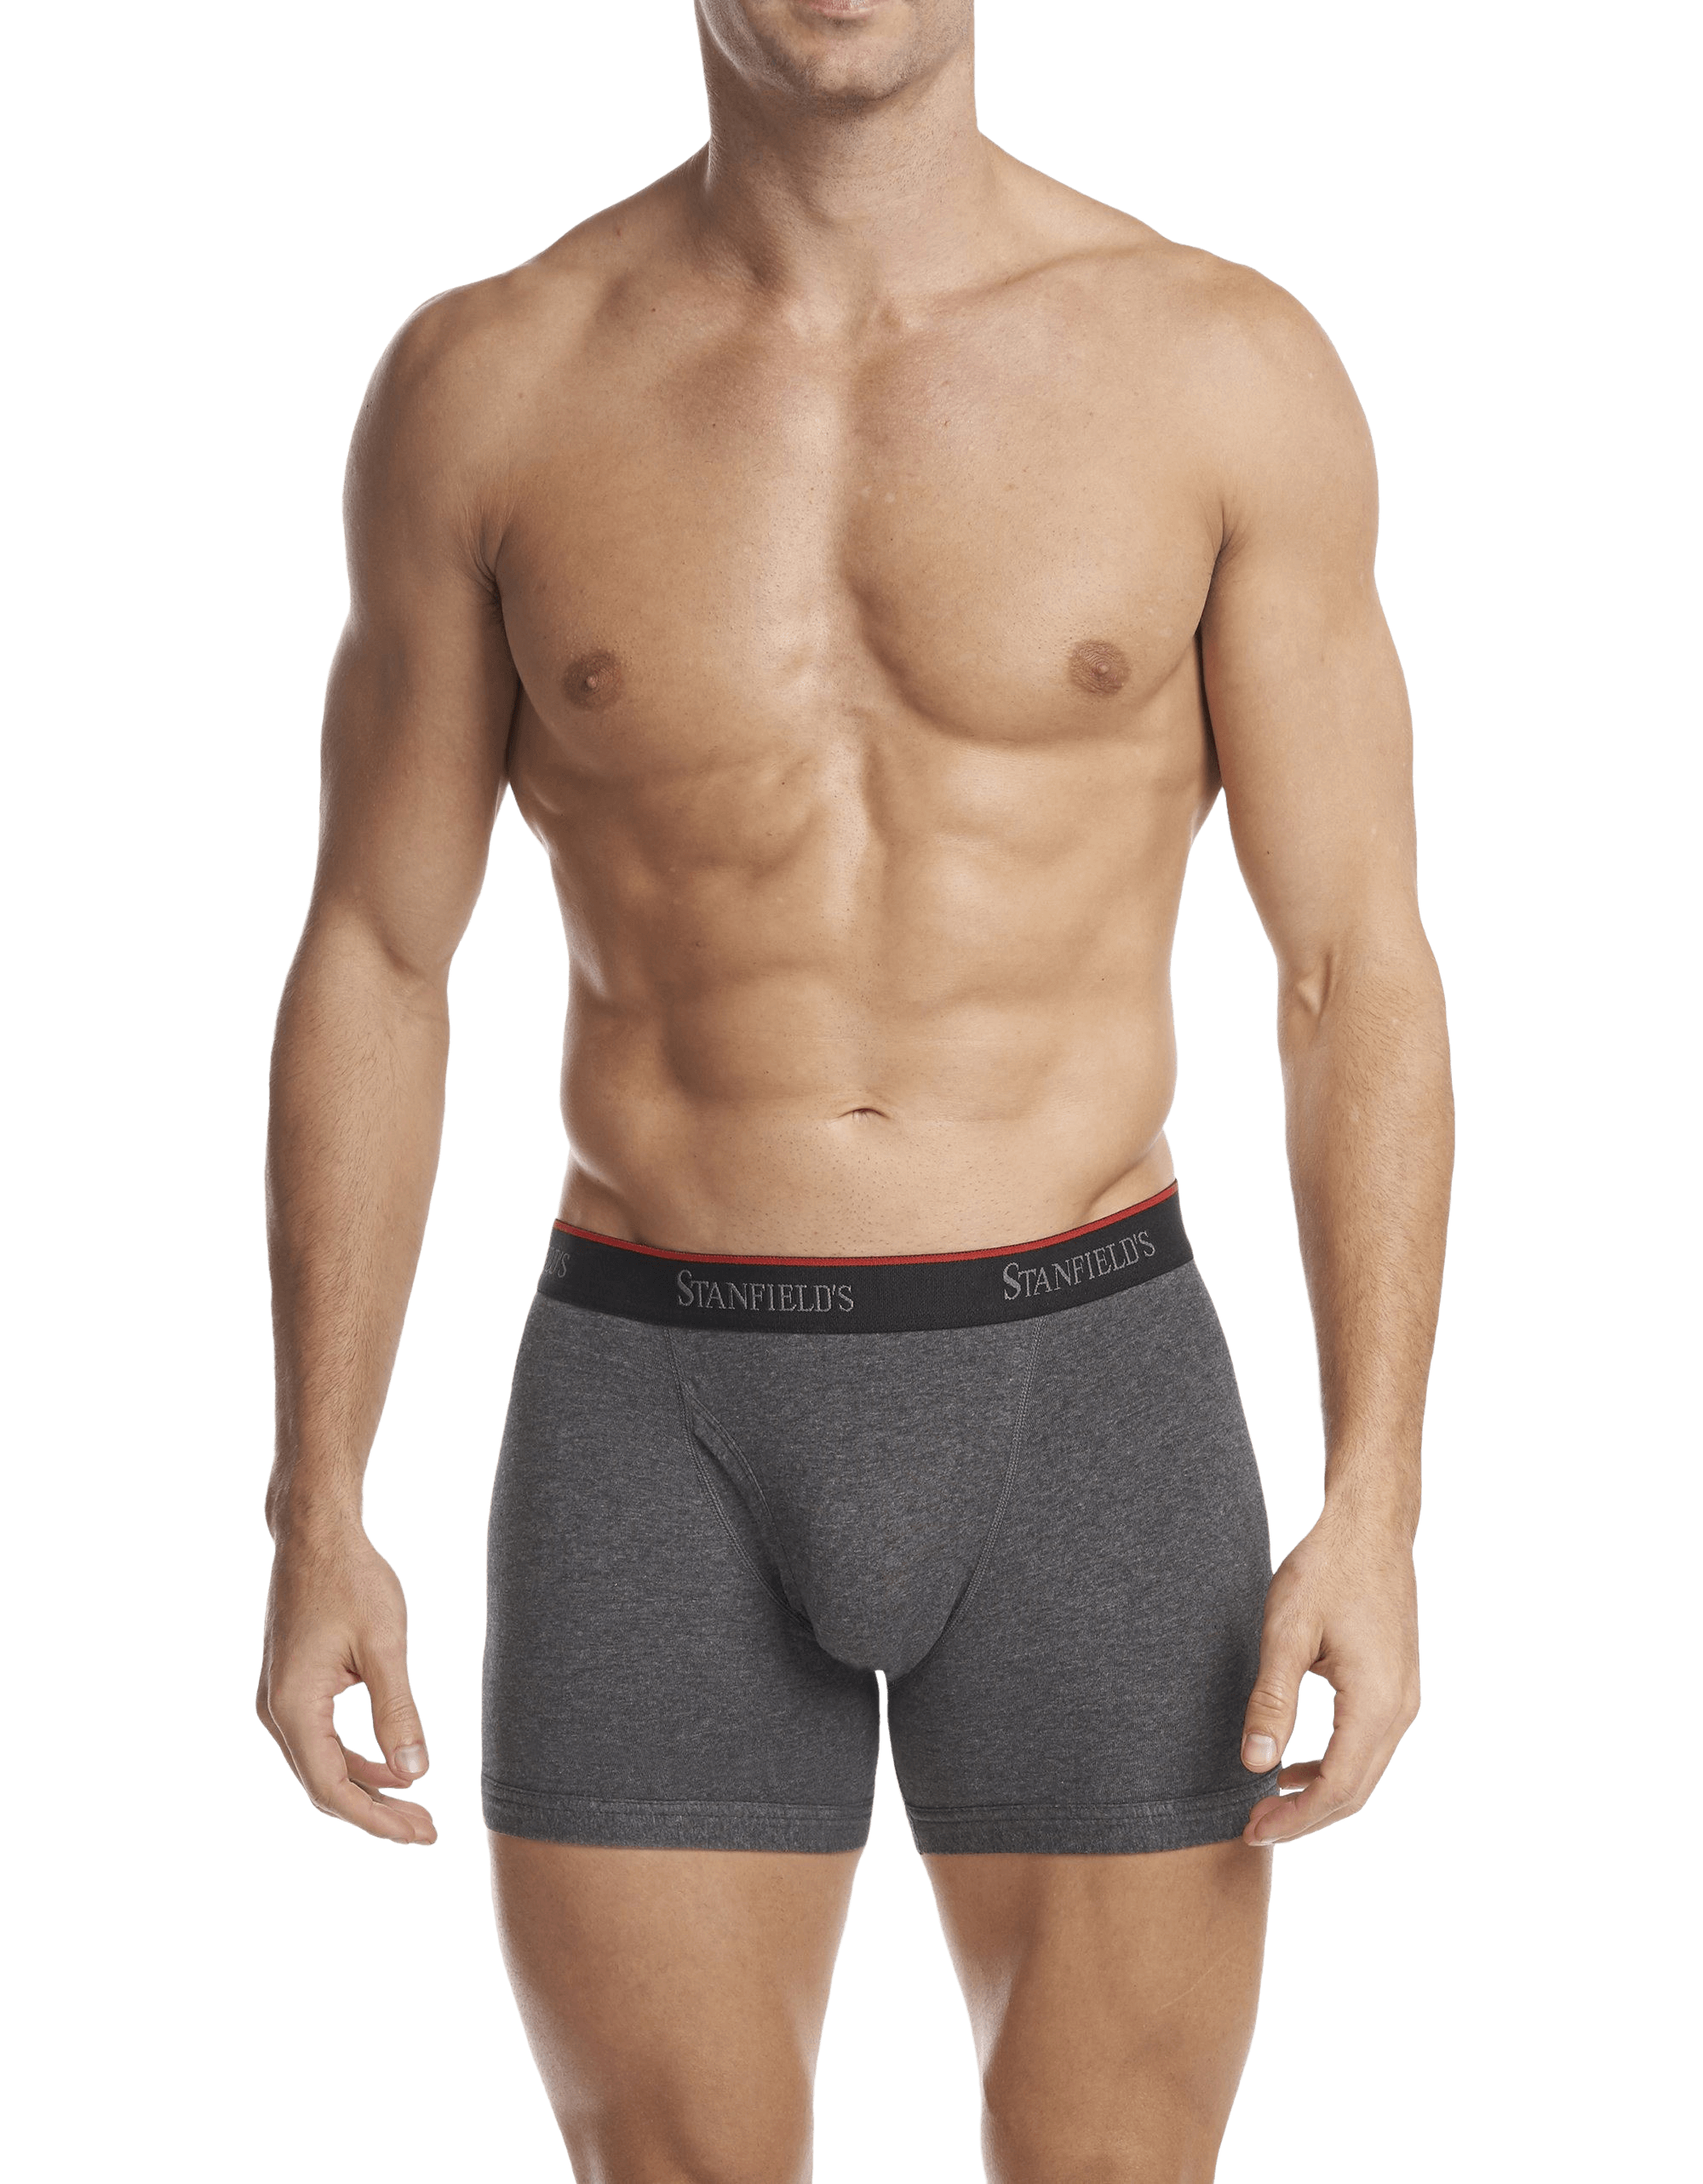 Stanfield's Men's 5 Pack Cotton Brief Grey, XL - Extra Large